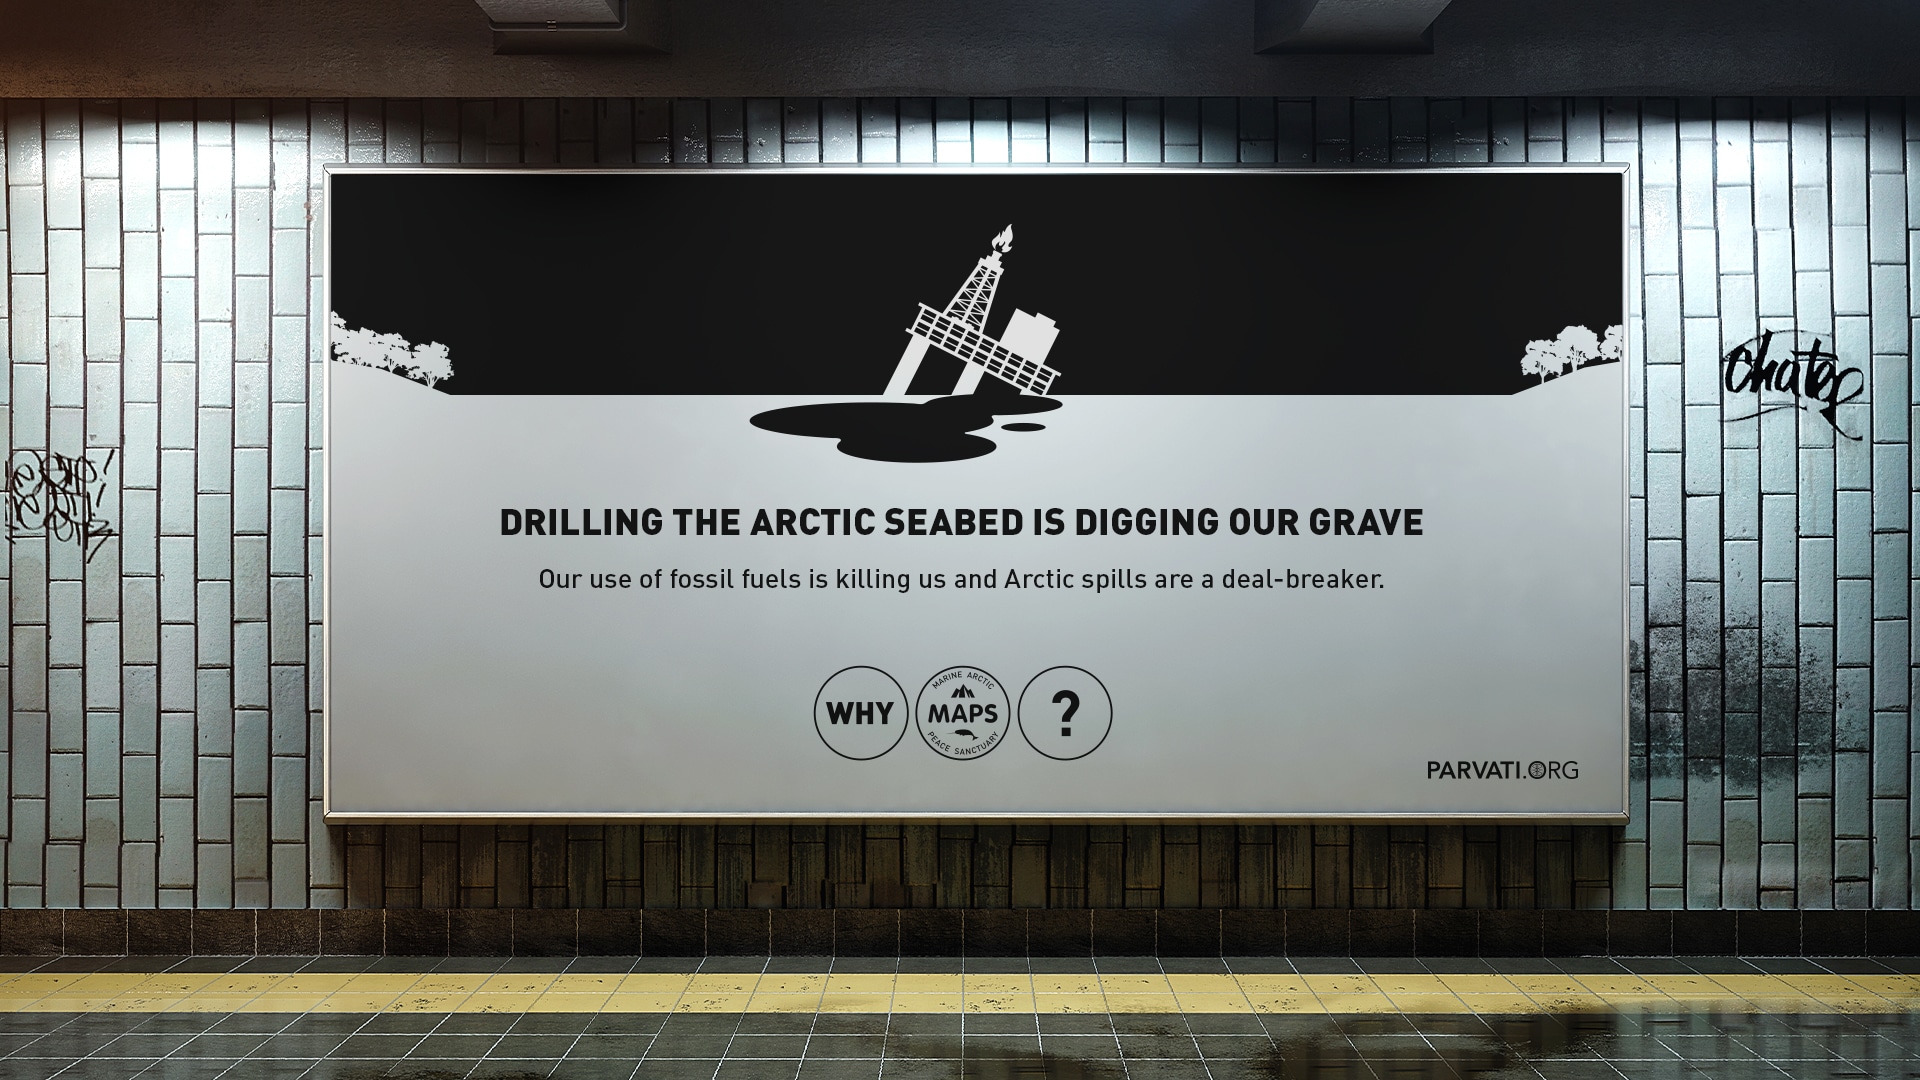 Why MAPS? Drilling the Arctic seabed is digging our grave, by Parvati